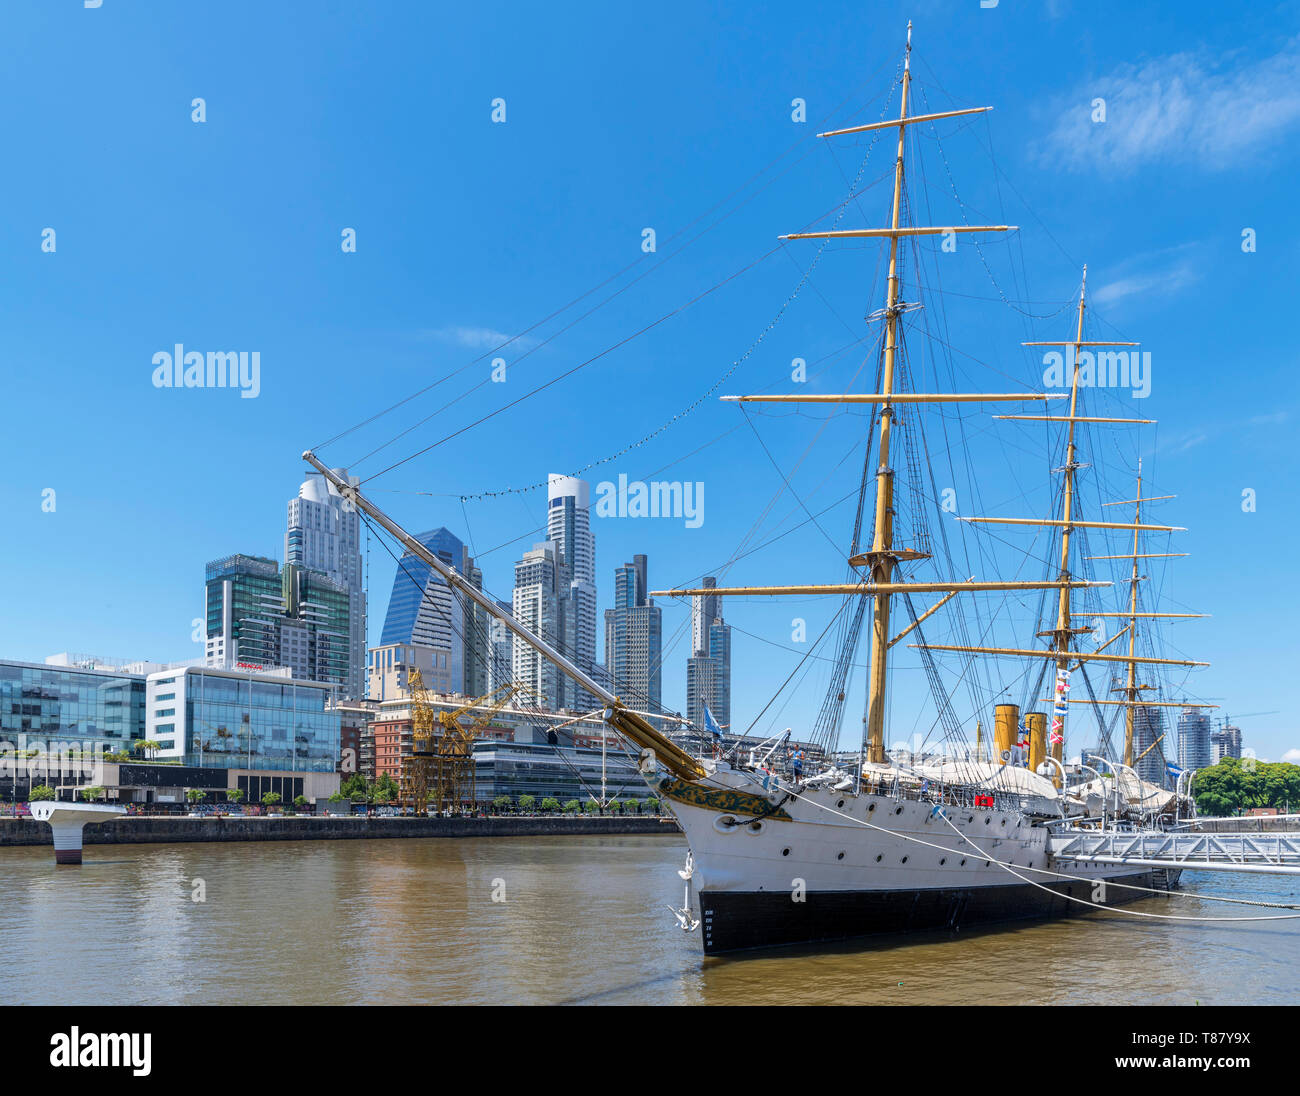 Waterfront at Puerto Madero looking towards the commercial district with museum ship ARA Presidente Sarmiento in foreground, Buenos Aires, Argentina Stock Photo